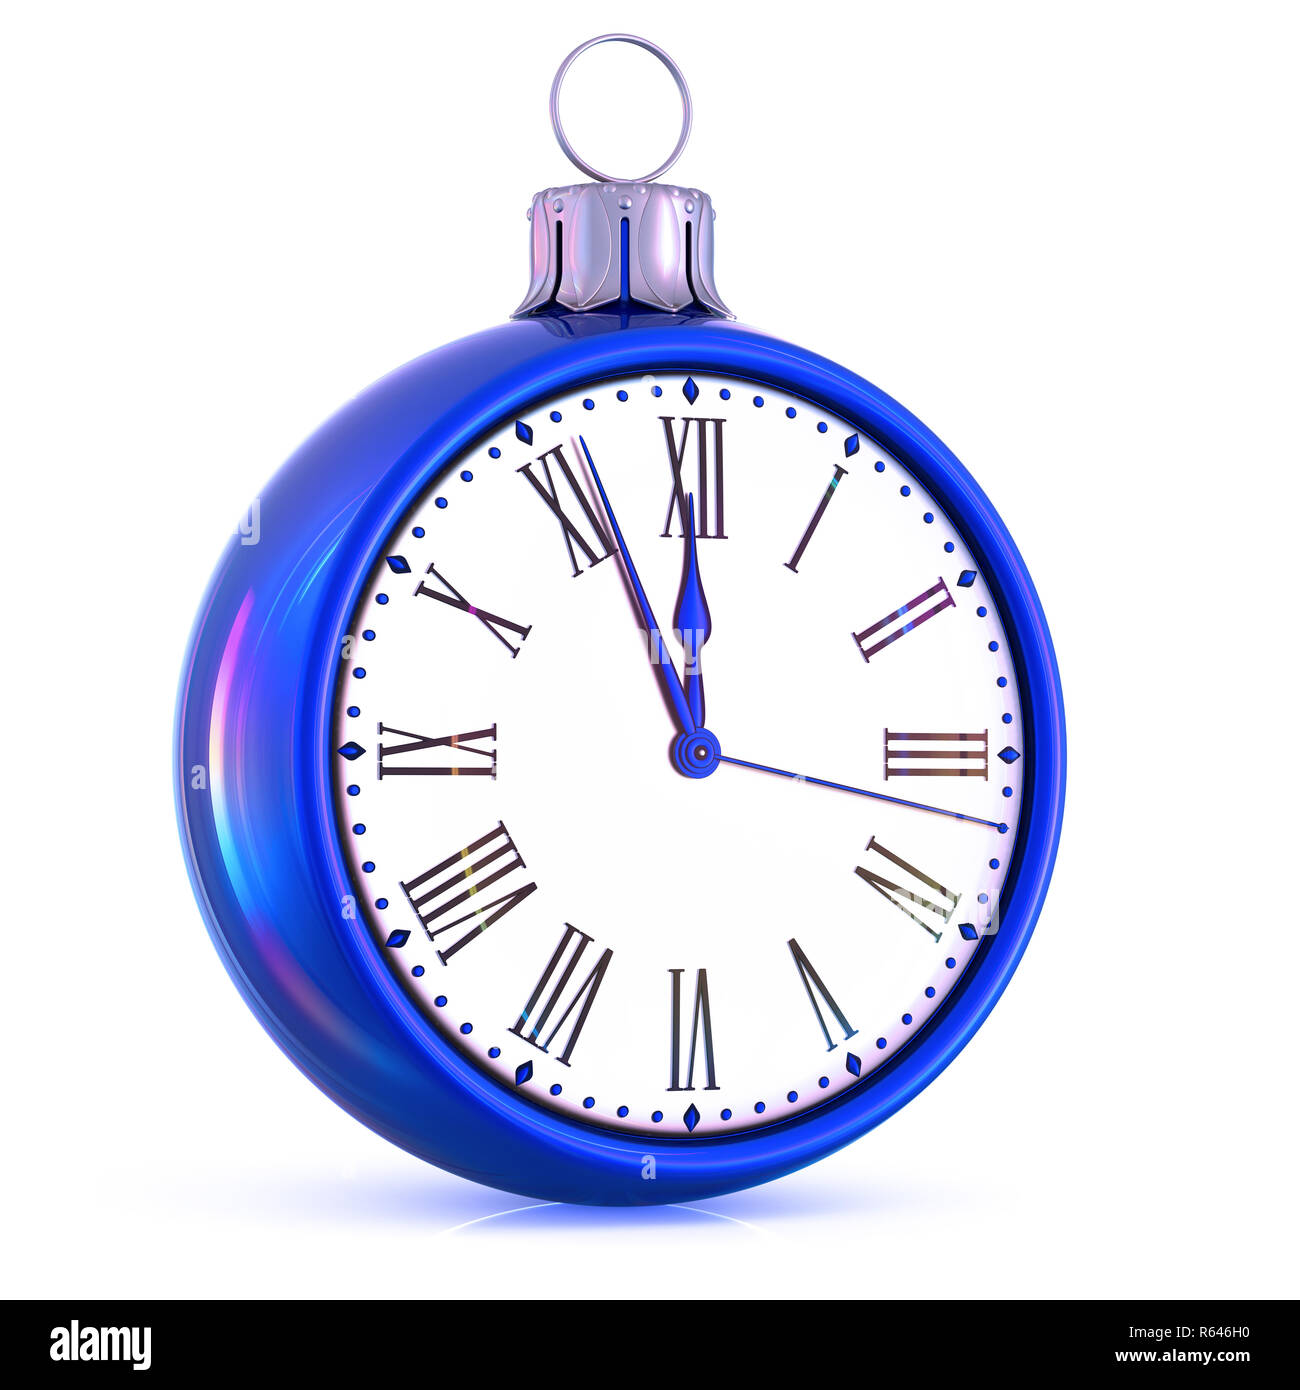 New Year 12 clock last hour midnight time countdown pressure. Christmas ball decoration ornament white blue adornment bauble. Happy wintertime holiday Stock Photo